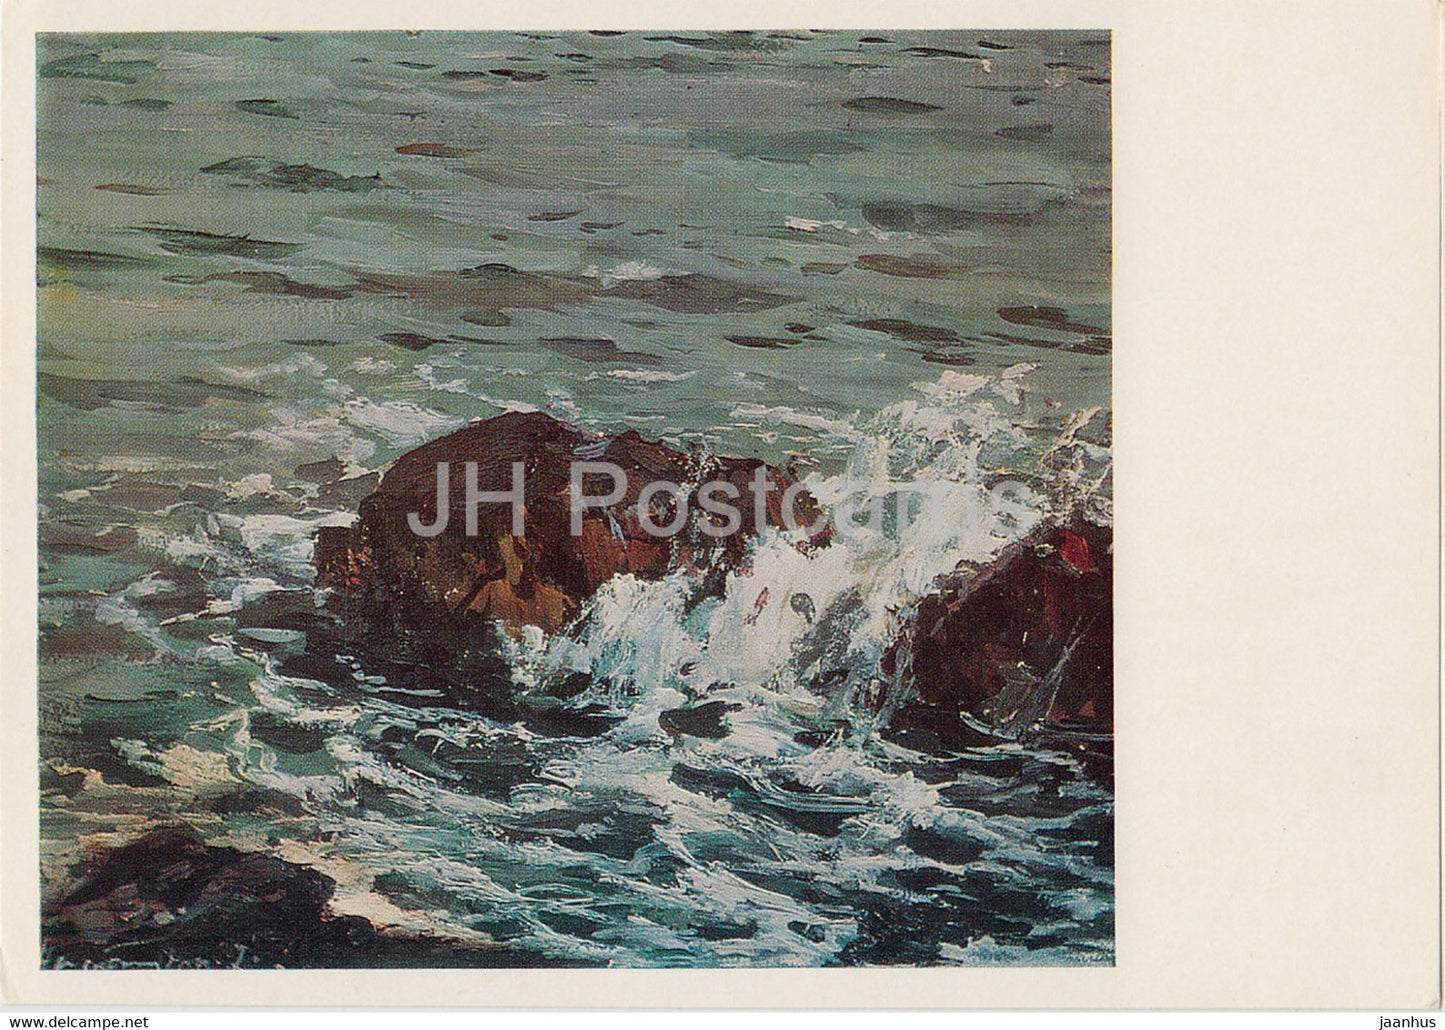 painting by D. Nalbandyan - After the storm - Armenian art - 1976 - Russia USSR - unused - JH Postcards